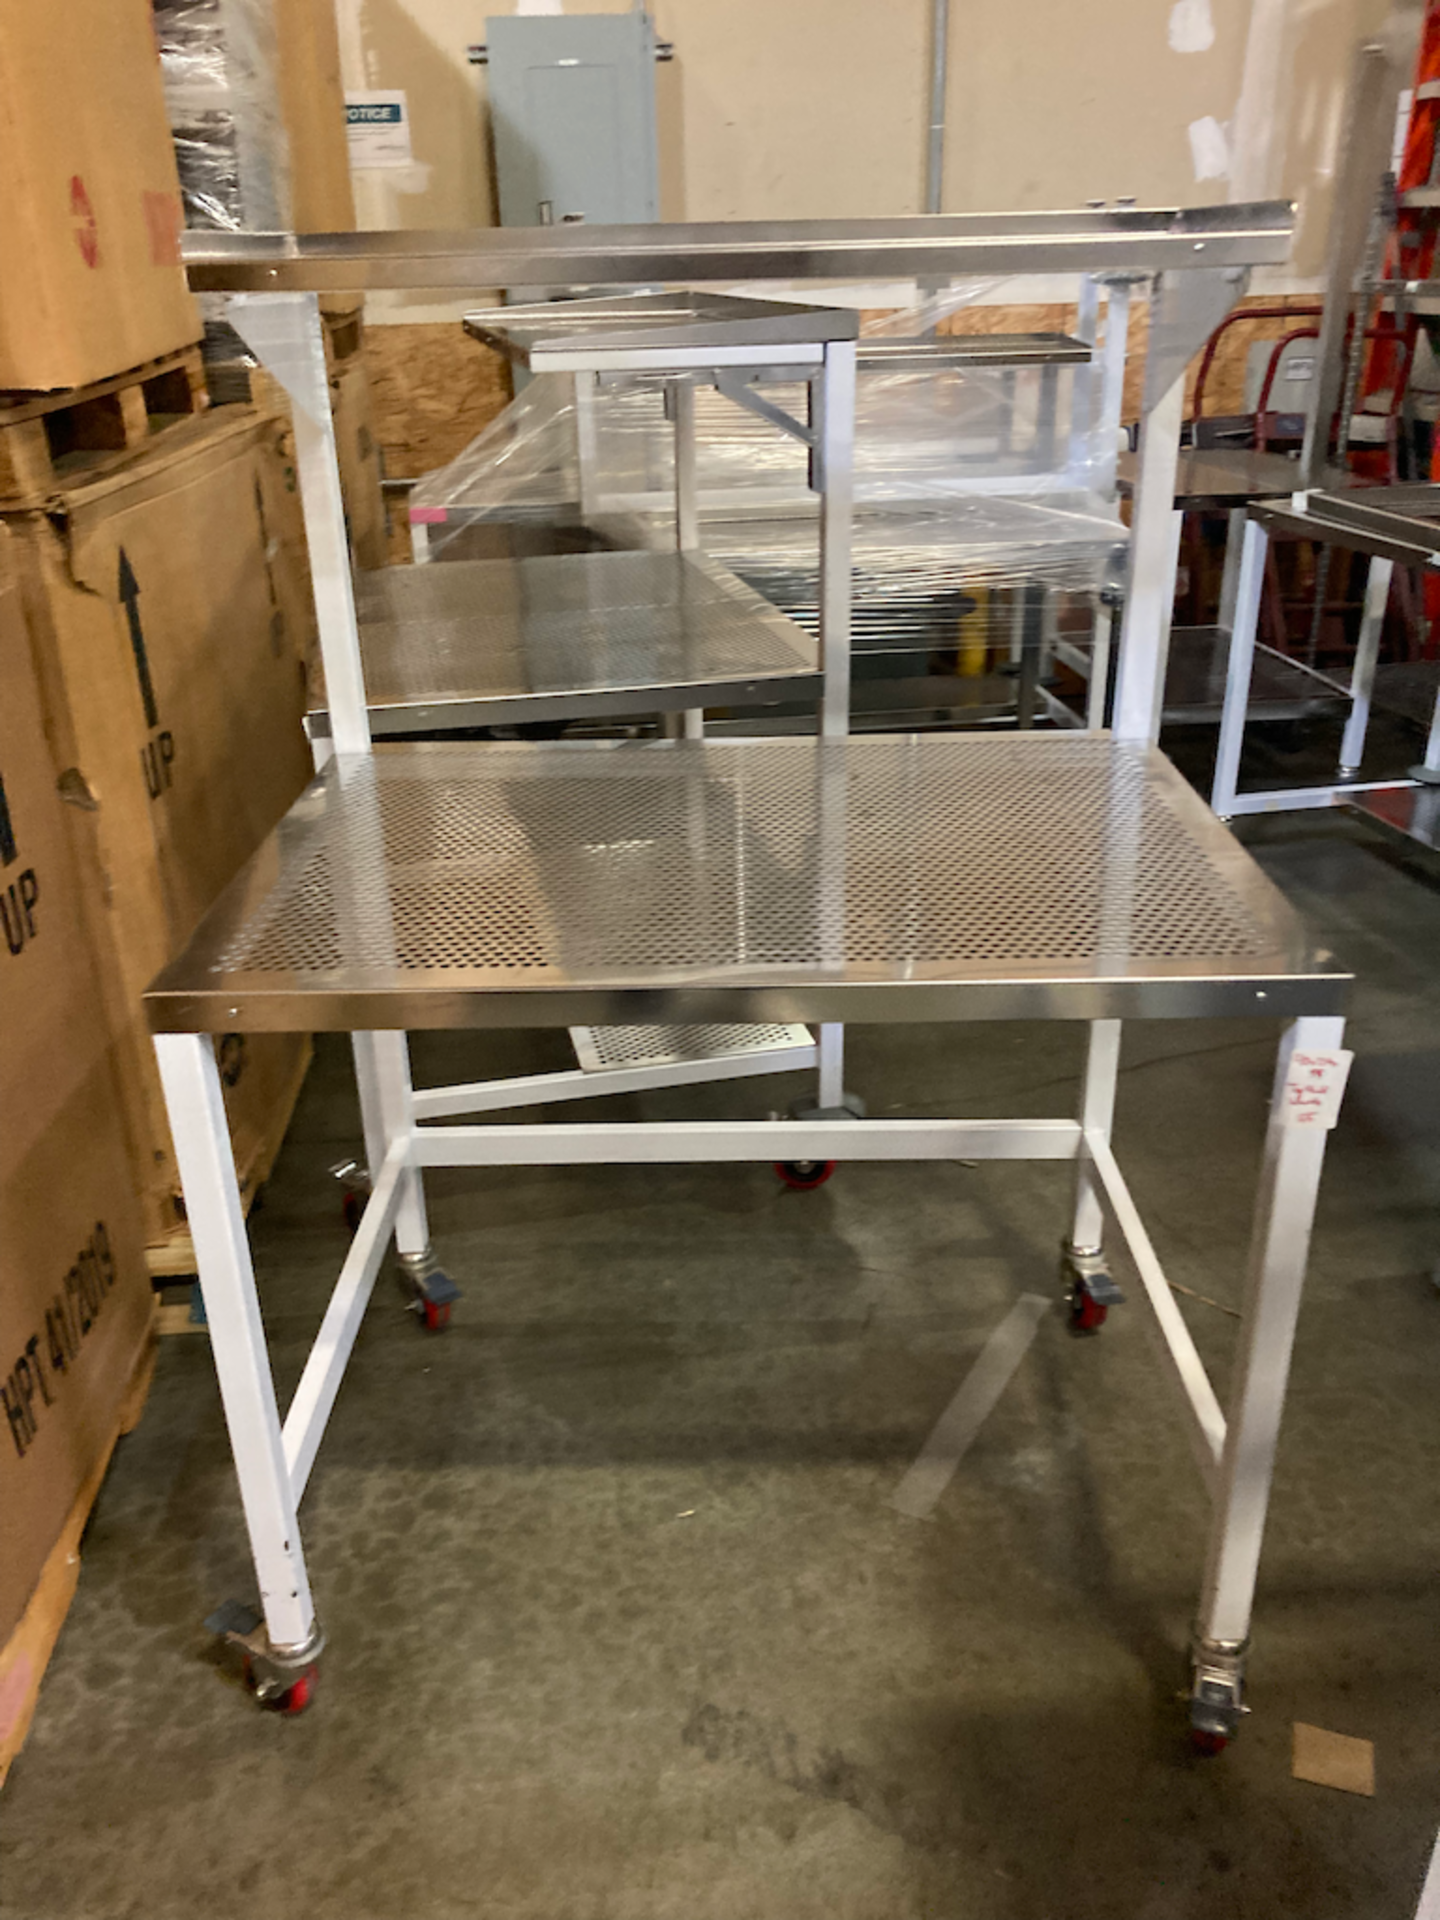 40 x 29 x 58 Perforated Stainless Steel Cleanroom Table Wheels, Top Shelf - Image 2 of 3